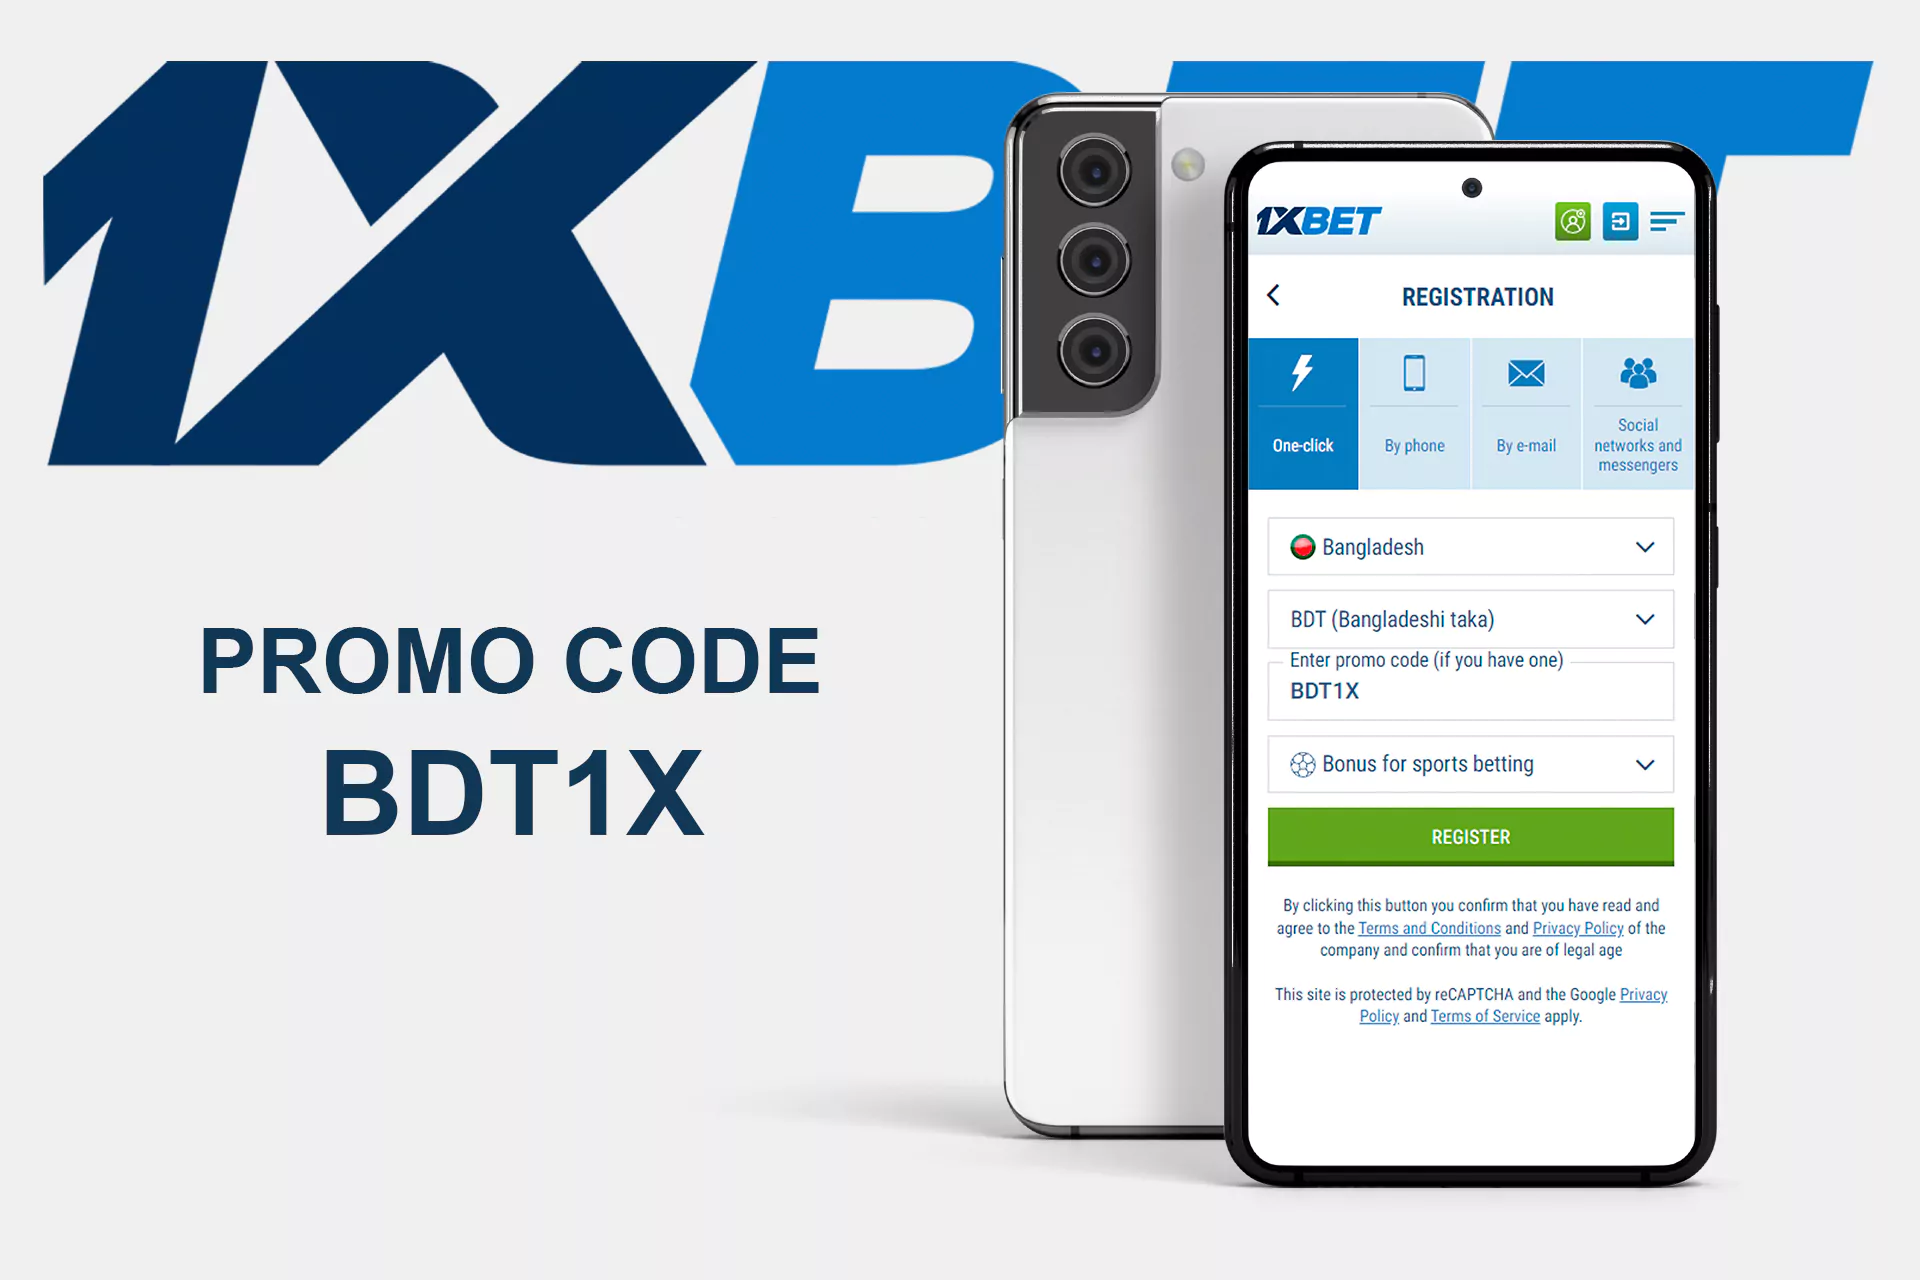 Use 1xBet promo code BDT1X in our official app.